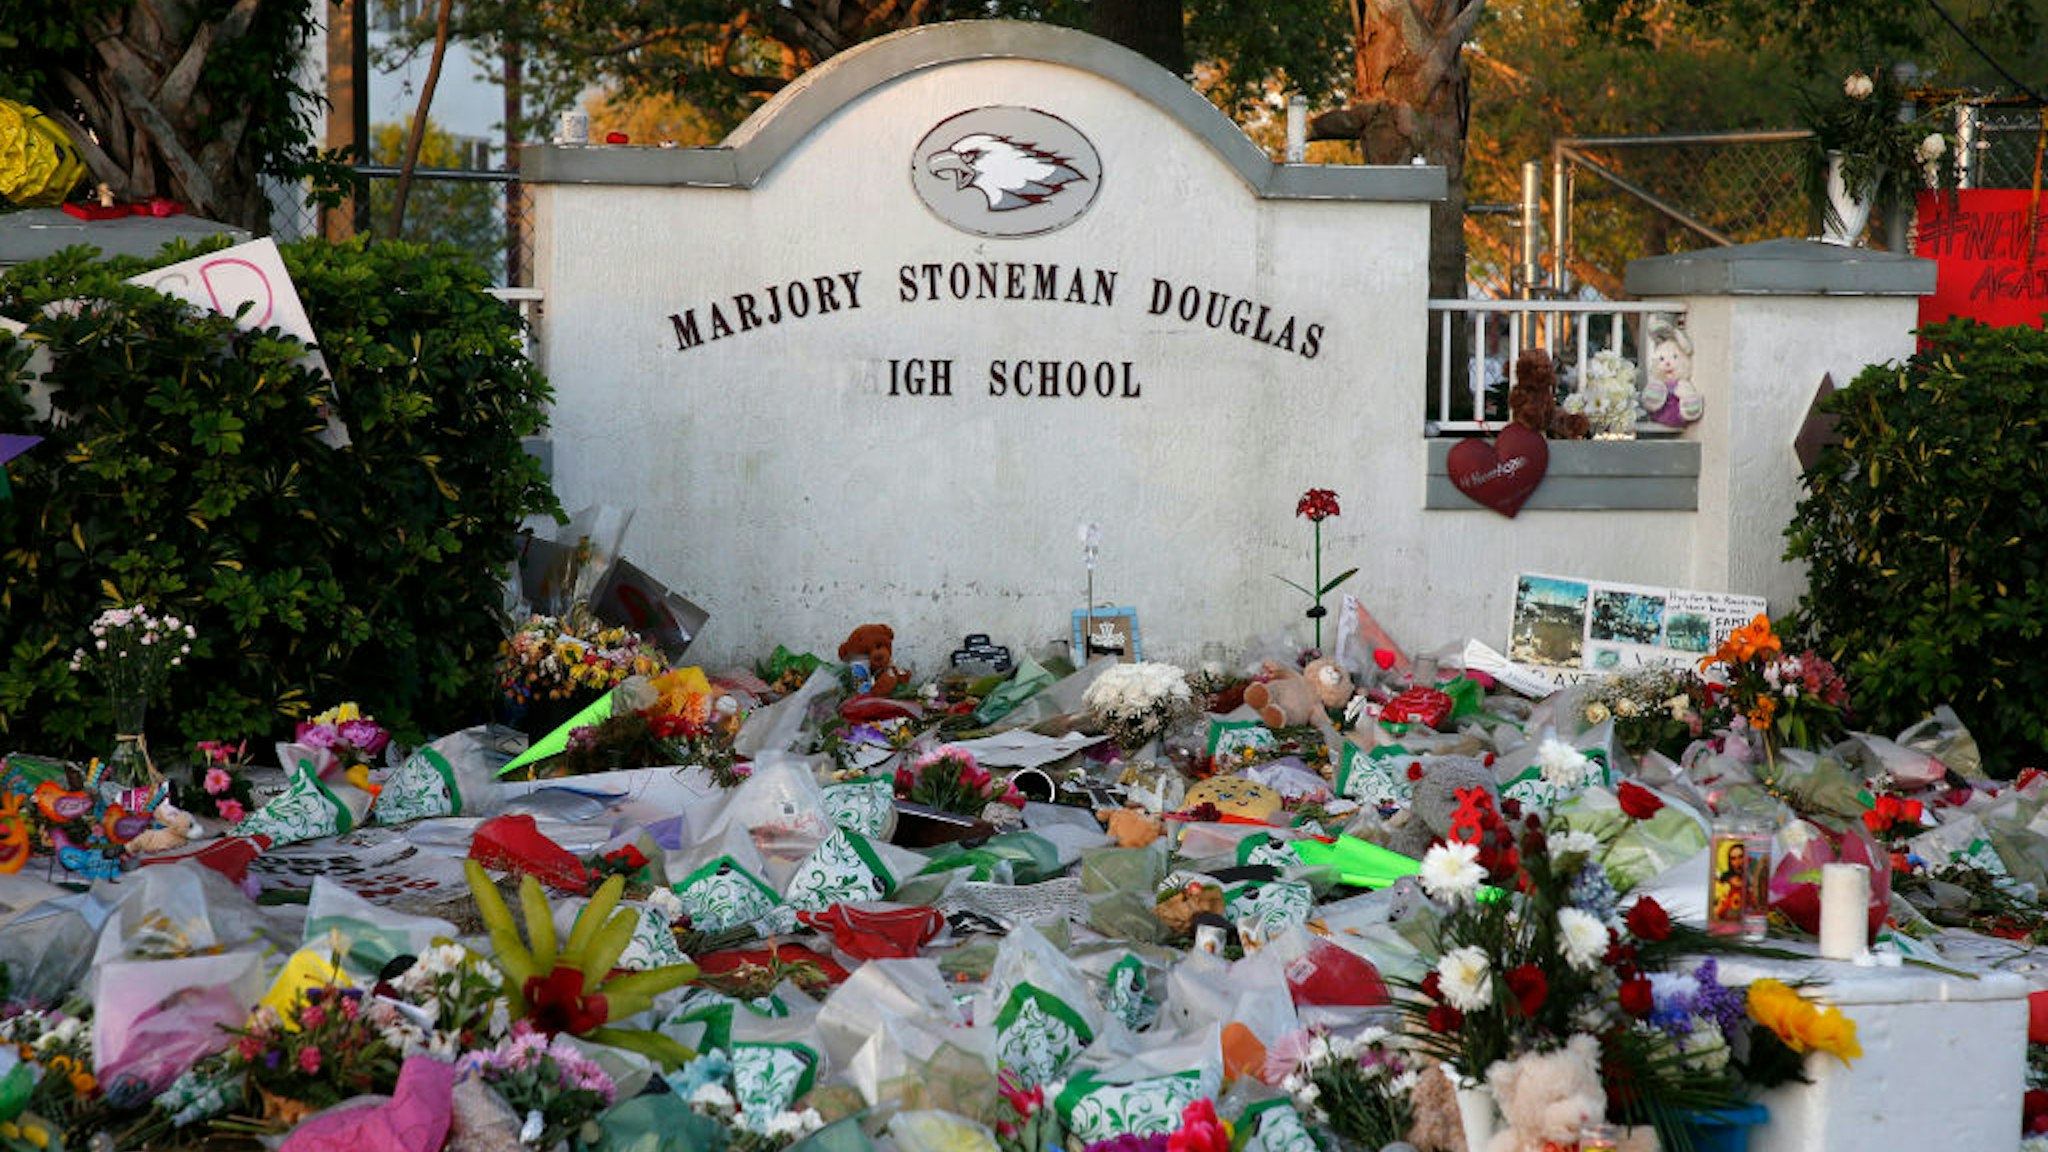 Flowers, candles and mementos sit outside one of the makeshift memorials at Marjory Stoneman Douglas High School in Parkland, Florida on February 27, 2018. Florida's Marjory Stoneman Douglas high school will reopen on February 28, 2018 two weeks after 17 people were killed in a shooting by former student, Nikolas Cruz, leaving 17 people dead and 15 injured on February 14, 2018.